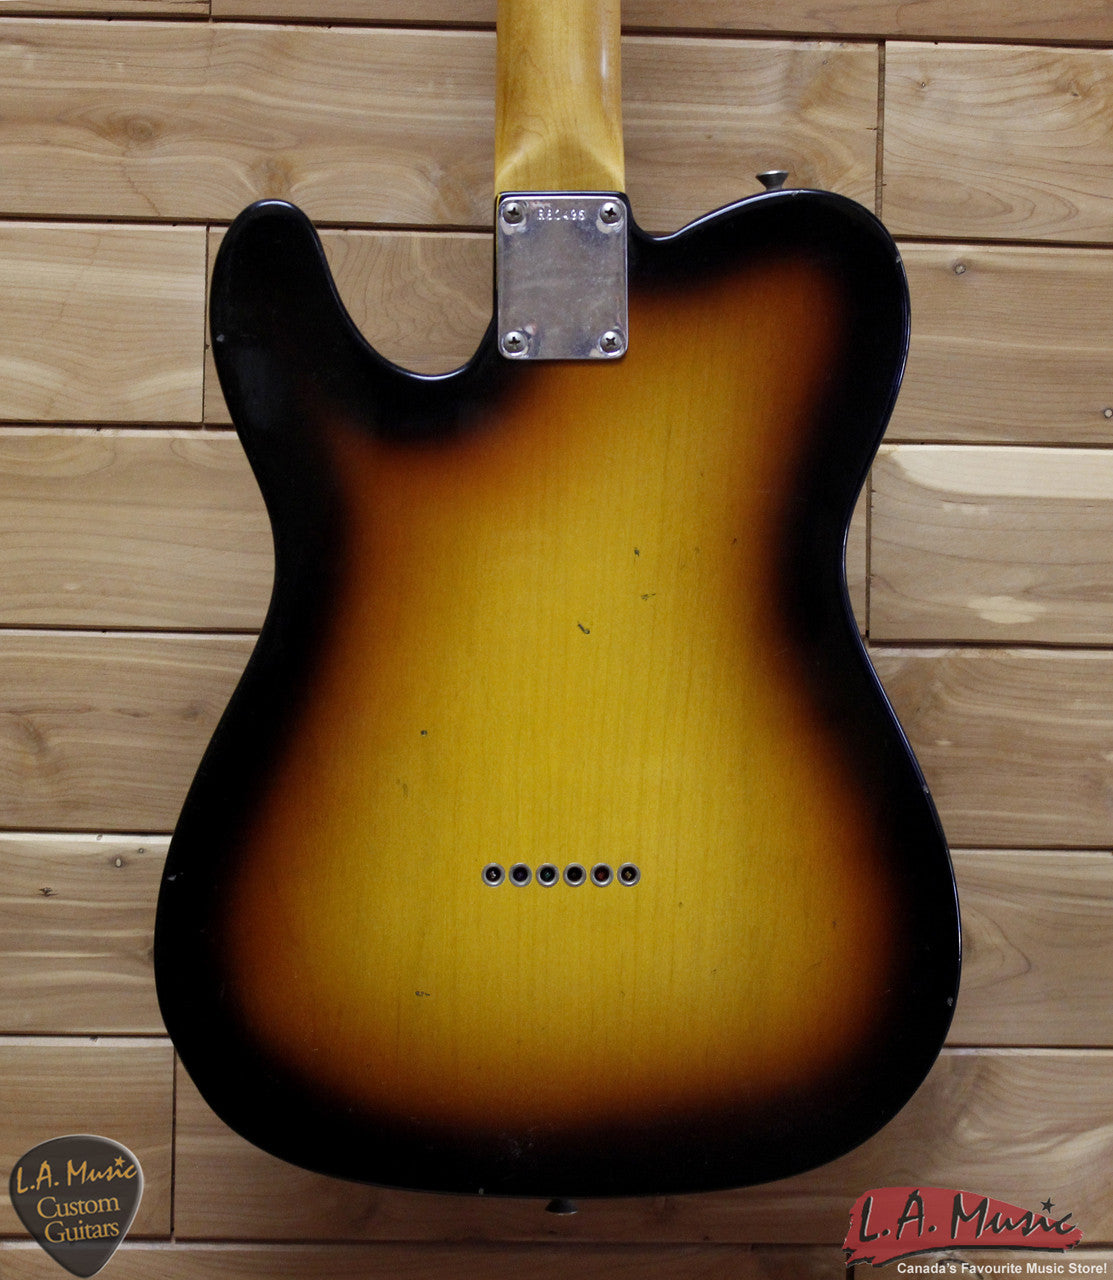 Fender Custom Shop 1963 Telecaster Journeyman Relic Rosewood Faded 3-Tone Sunburst - 9230300800 - Serial Number - R83496 - L.A. Music - Canada's Favourite Music Store!